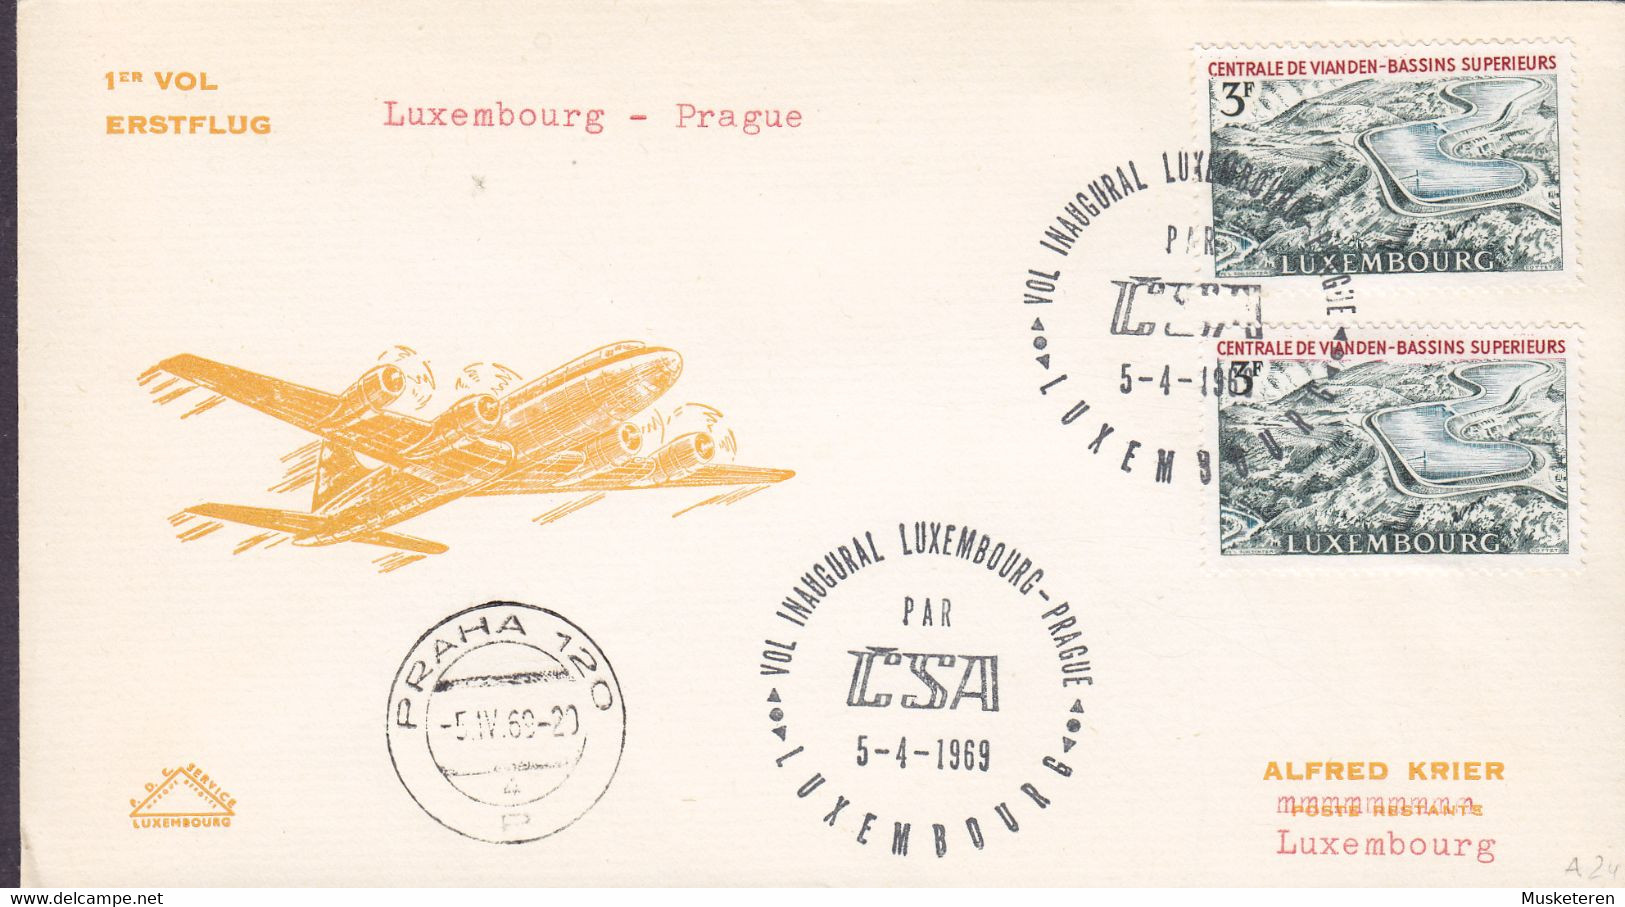 Luxembourg CSA First Flight Premier Vol LUXEMBOURG - PRAGUE, LUXEMBOURG 1969 Cover Brief Lettre - Cartas & Documentos